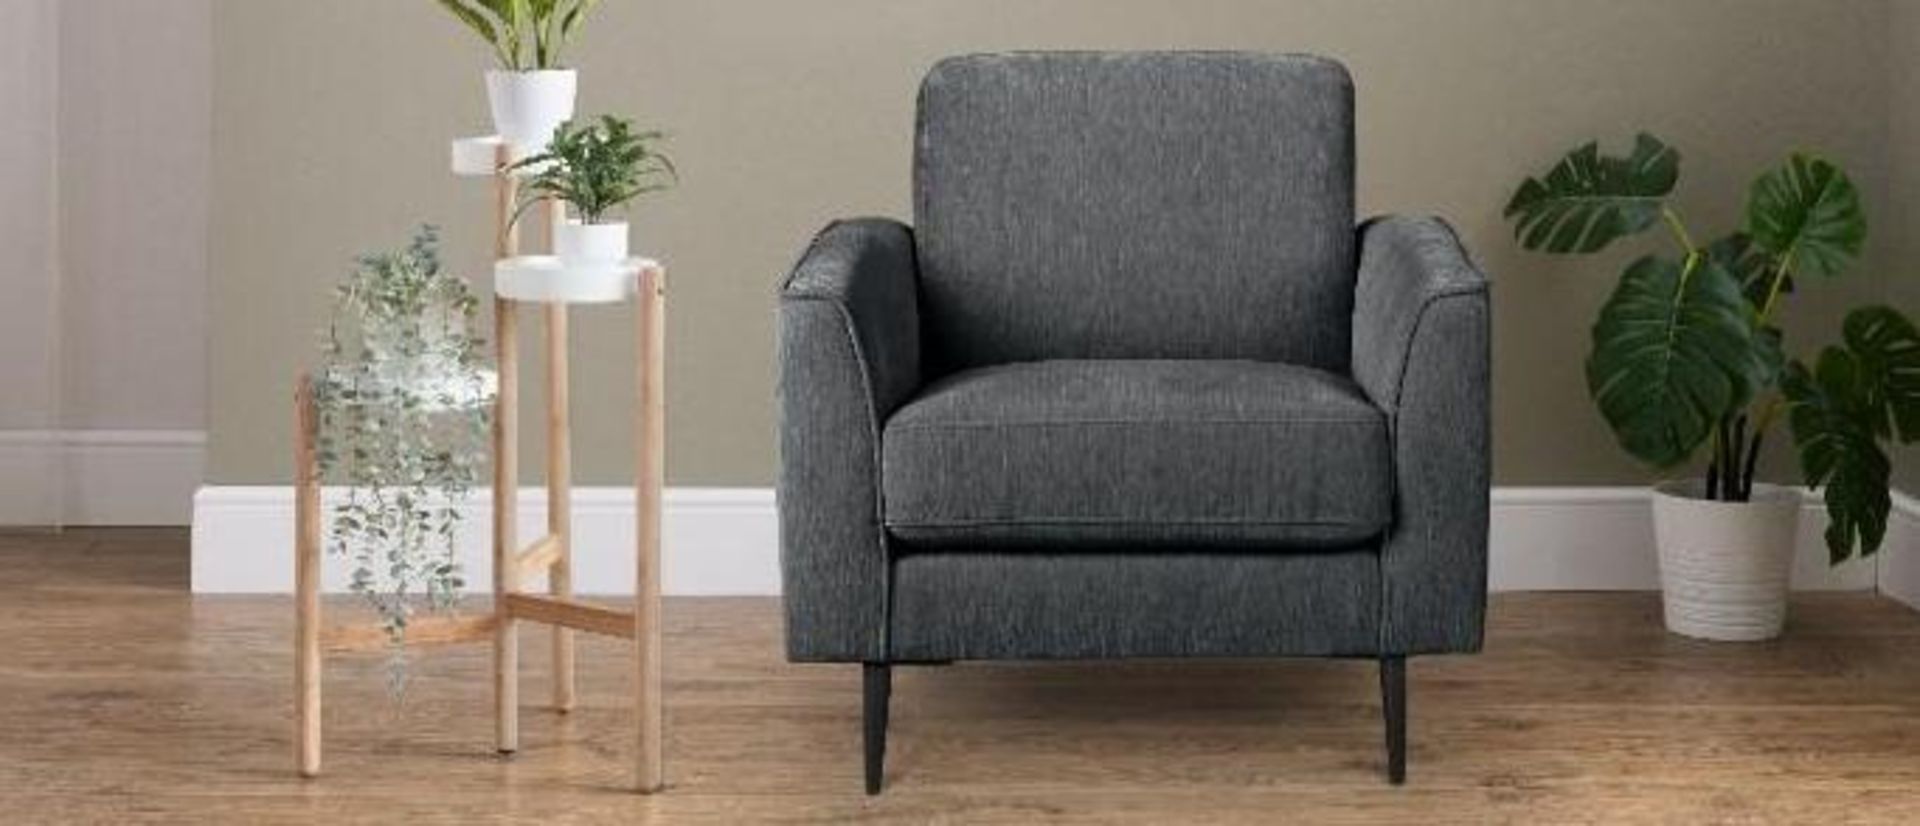 Brand new Boxed Vista Upholstered Armchair in Charcoal - Image 2 of 2